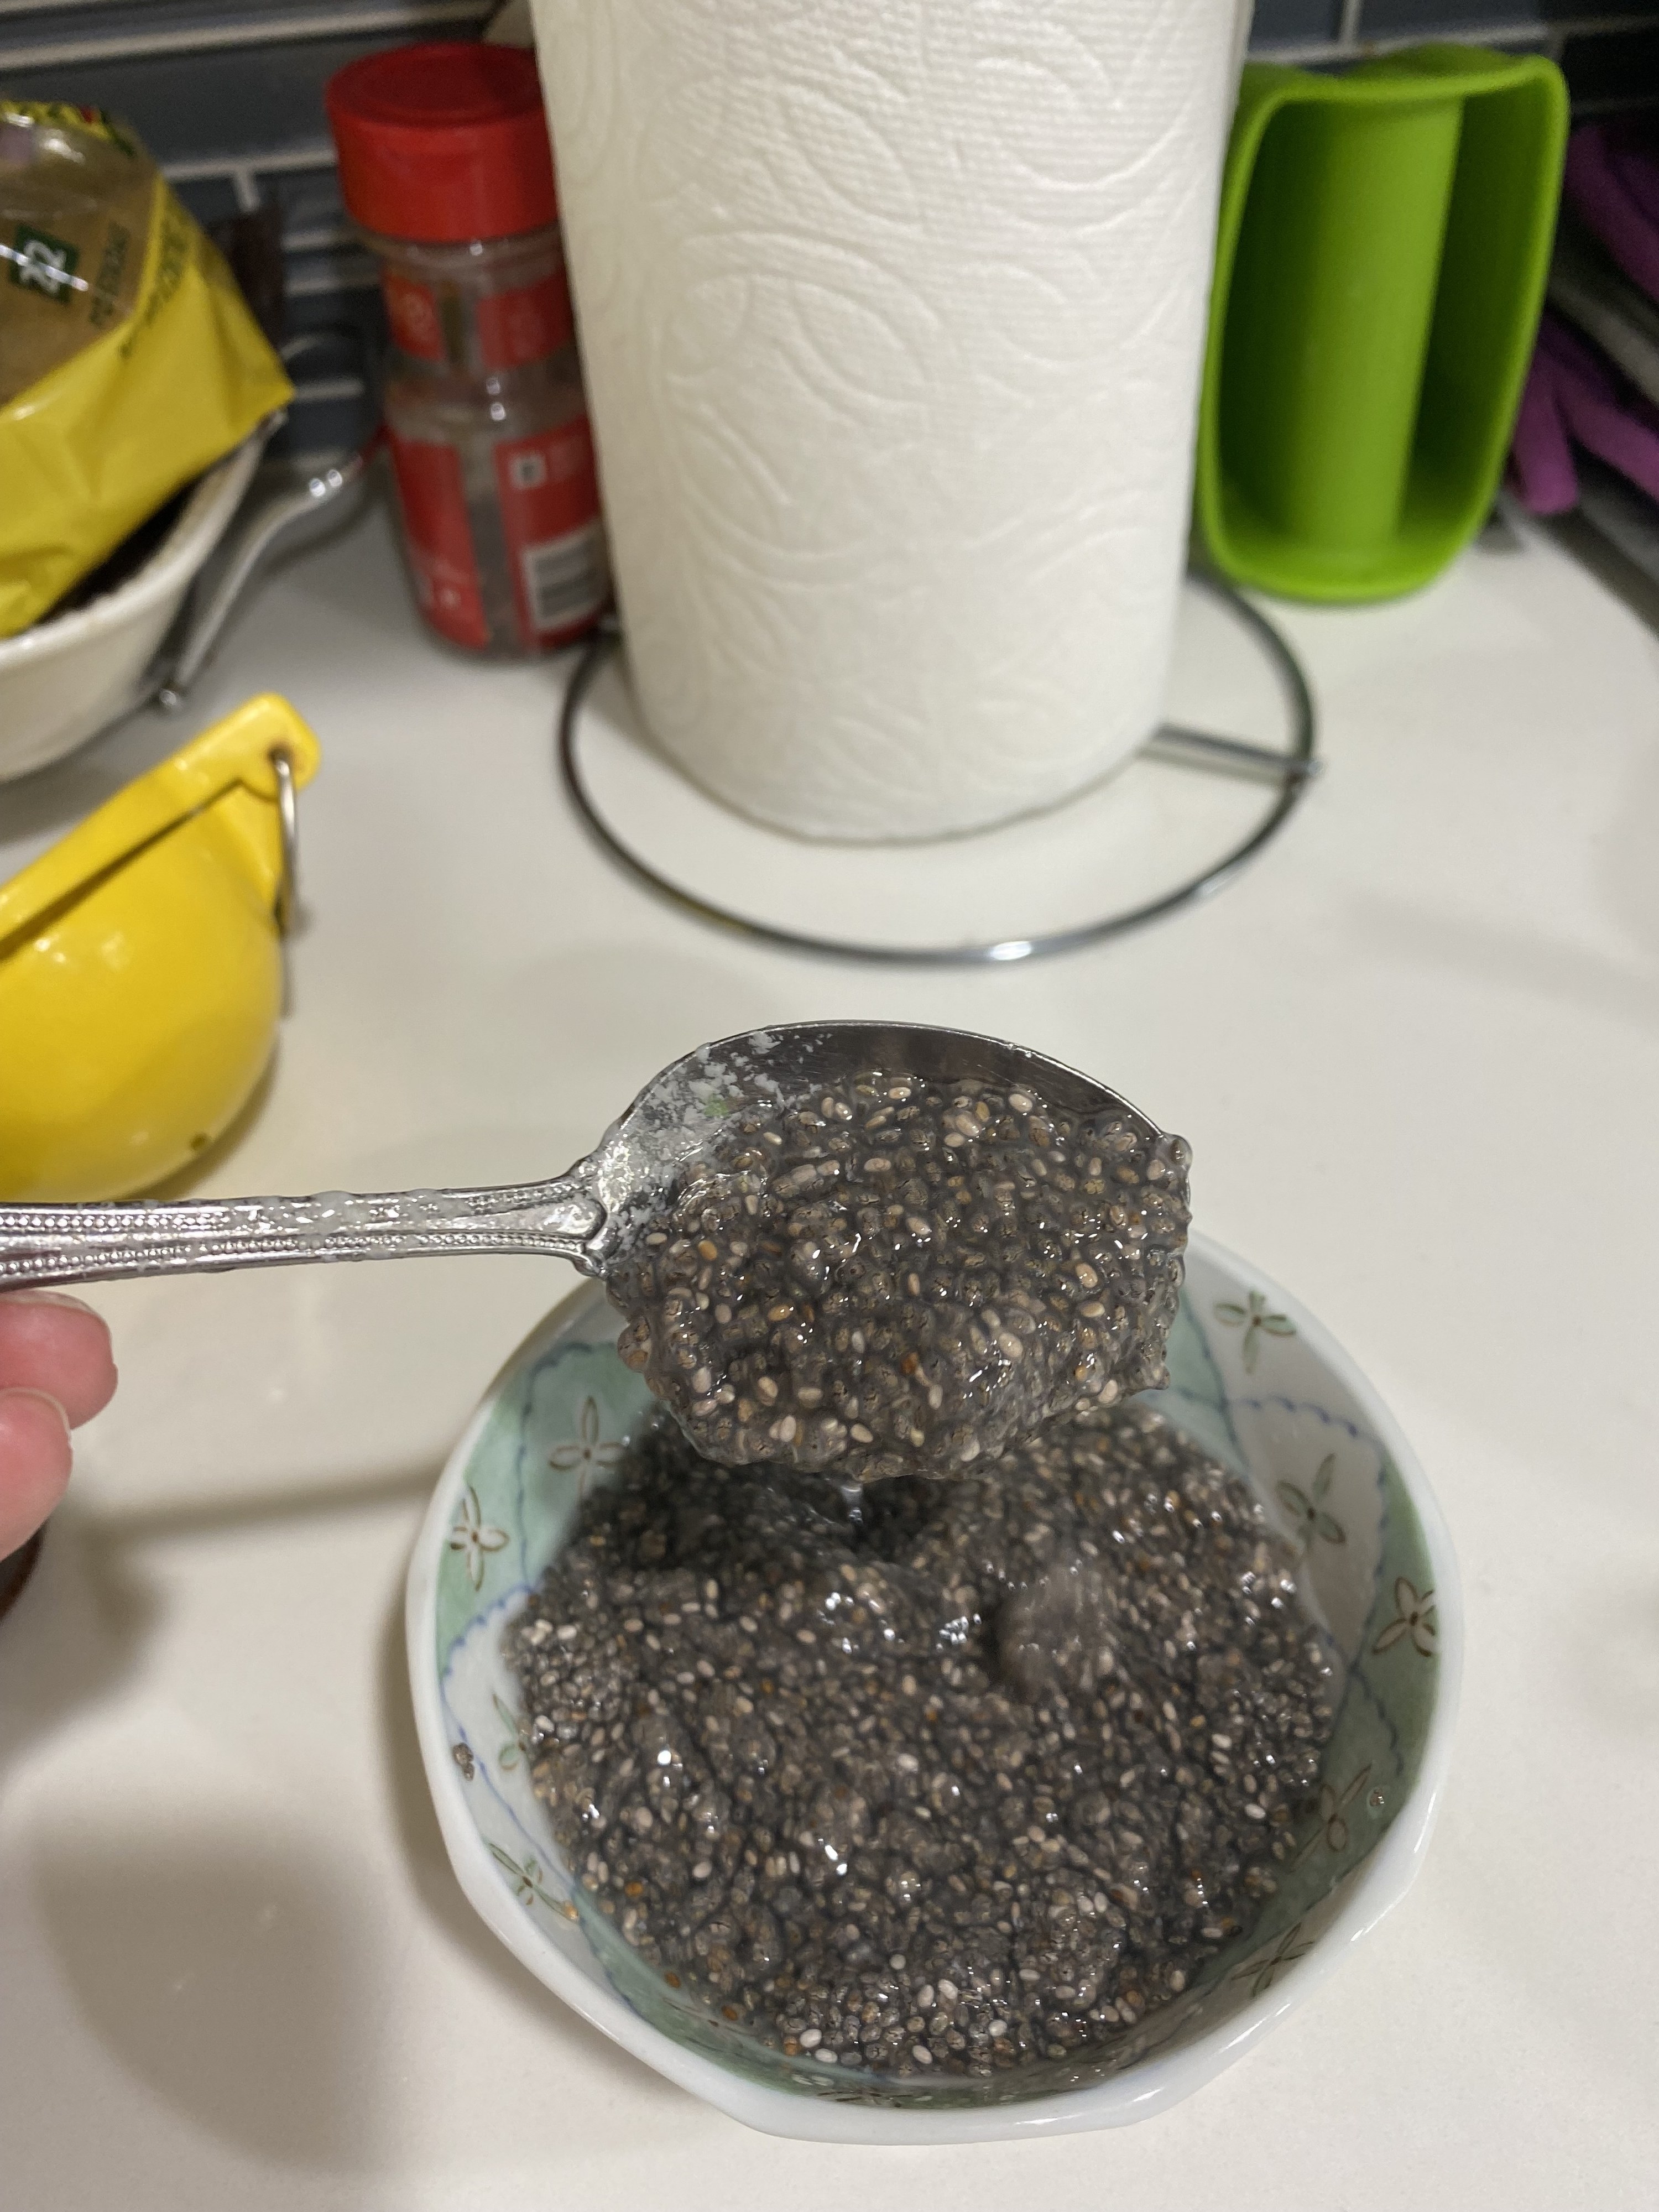 A close up of a spoonful of the &quot;chia egg&quot; which looks like a chia seed jelly